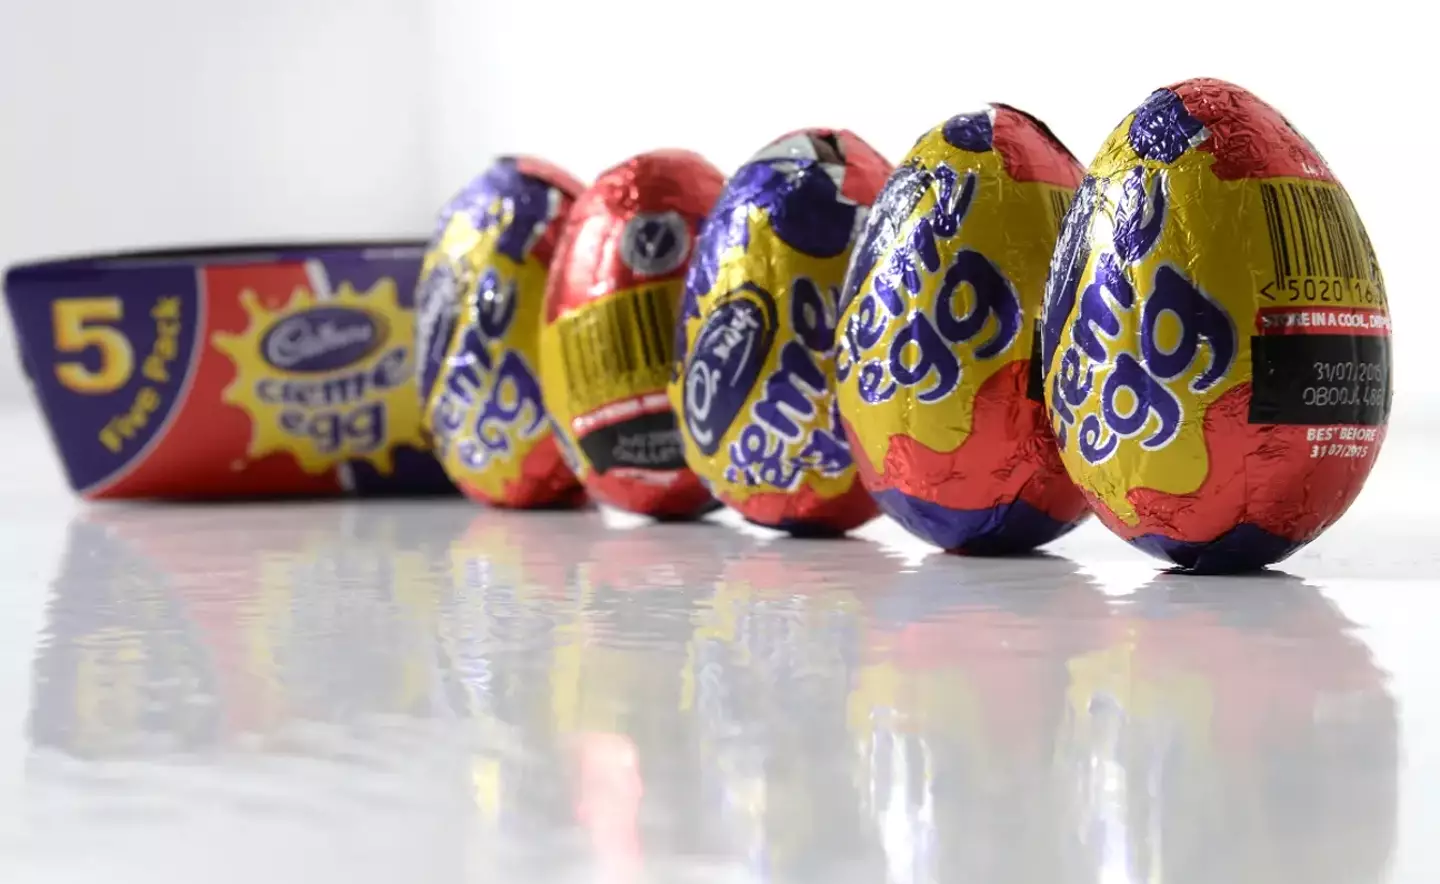 Just one little Creme egg is almost your entire daily allowance of sugar.